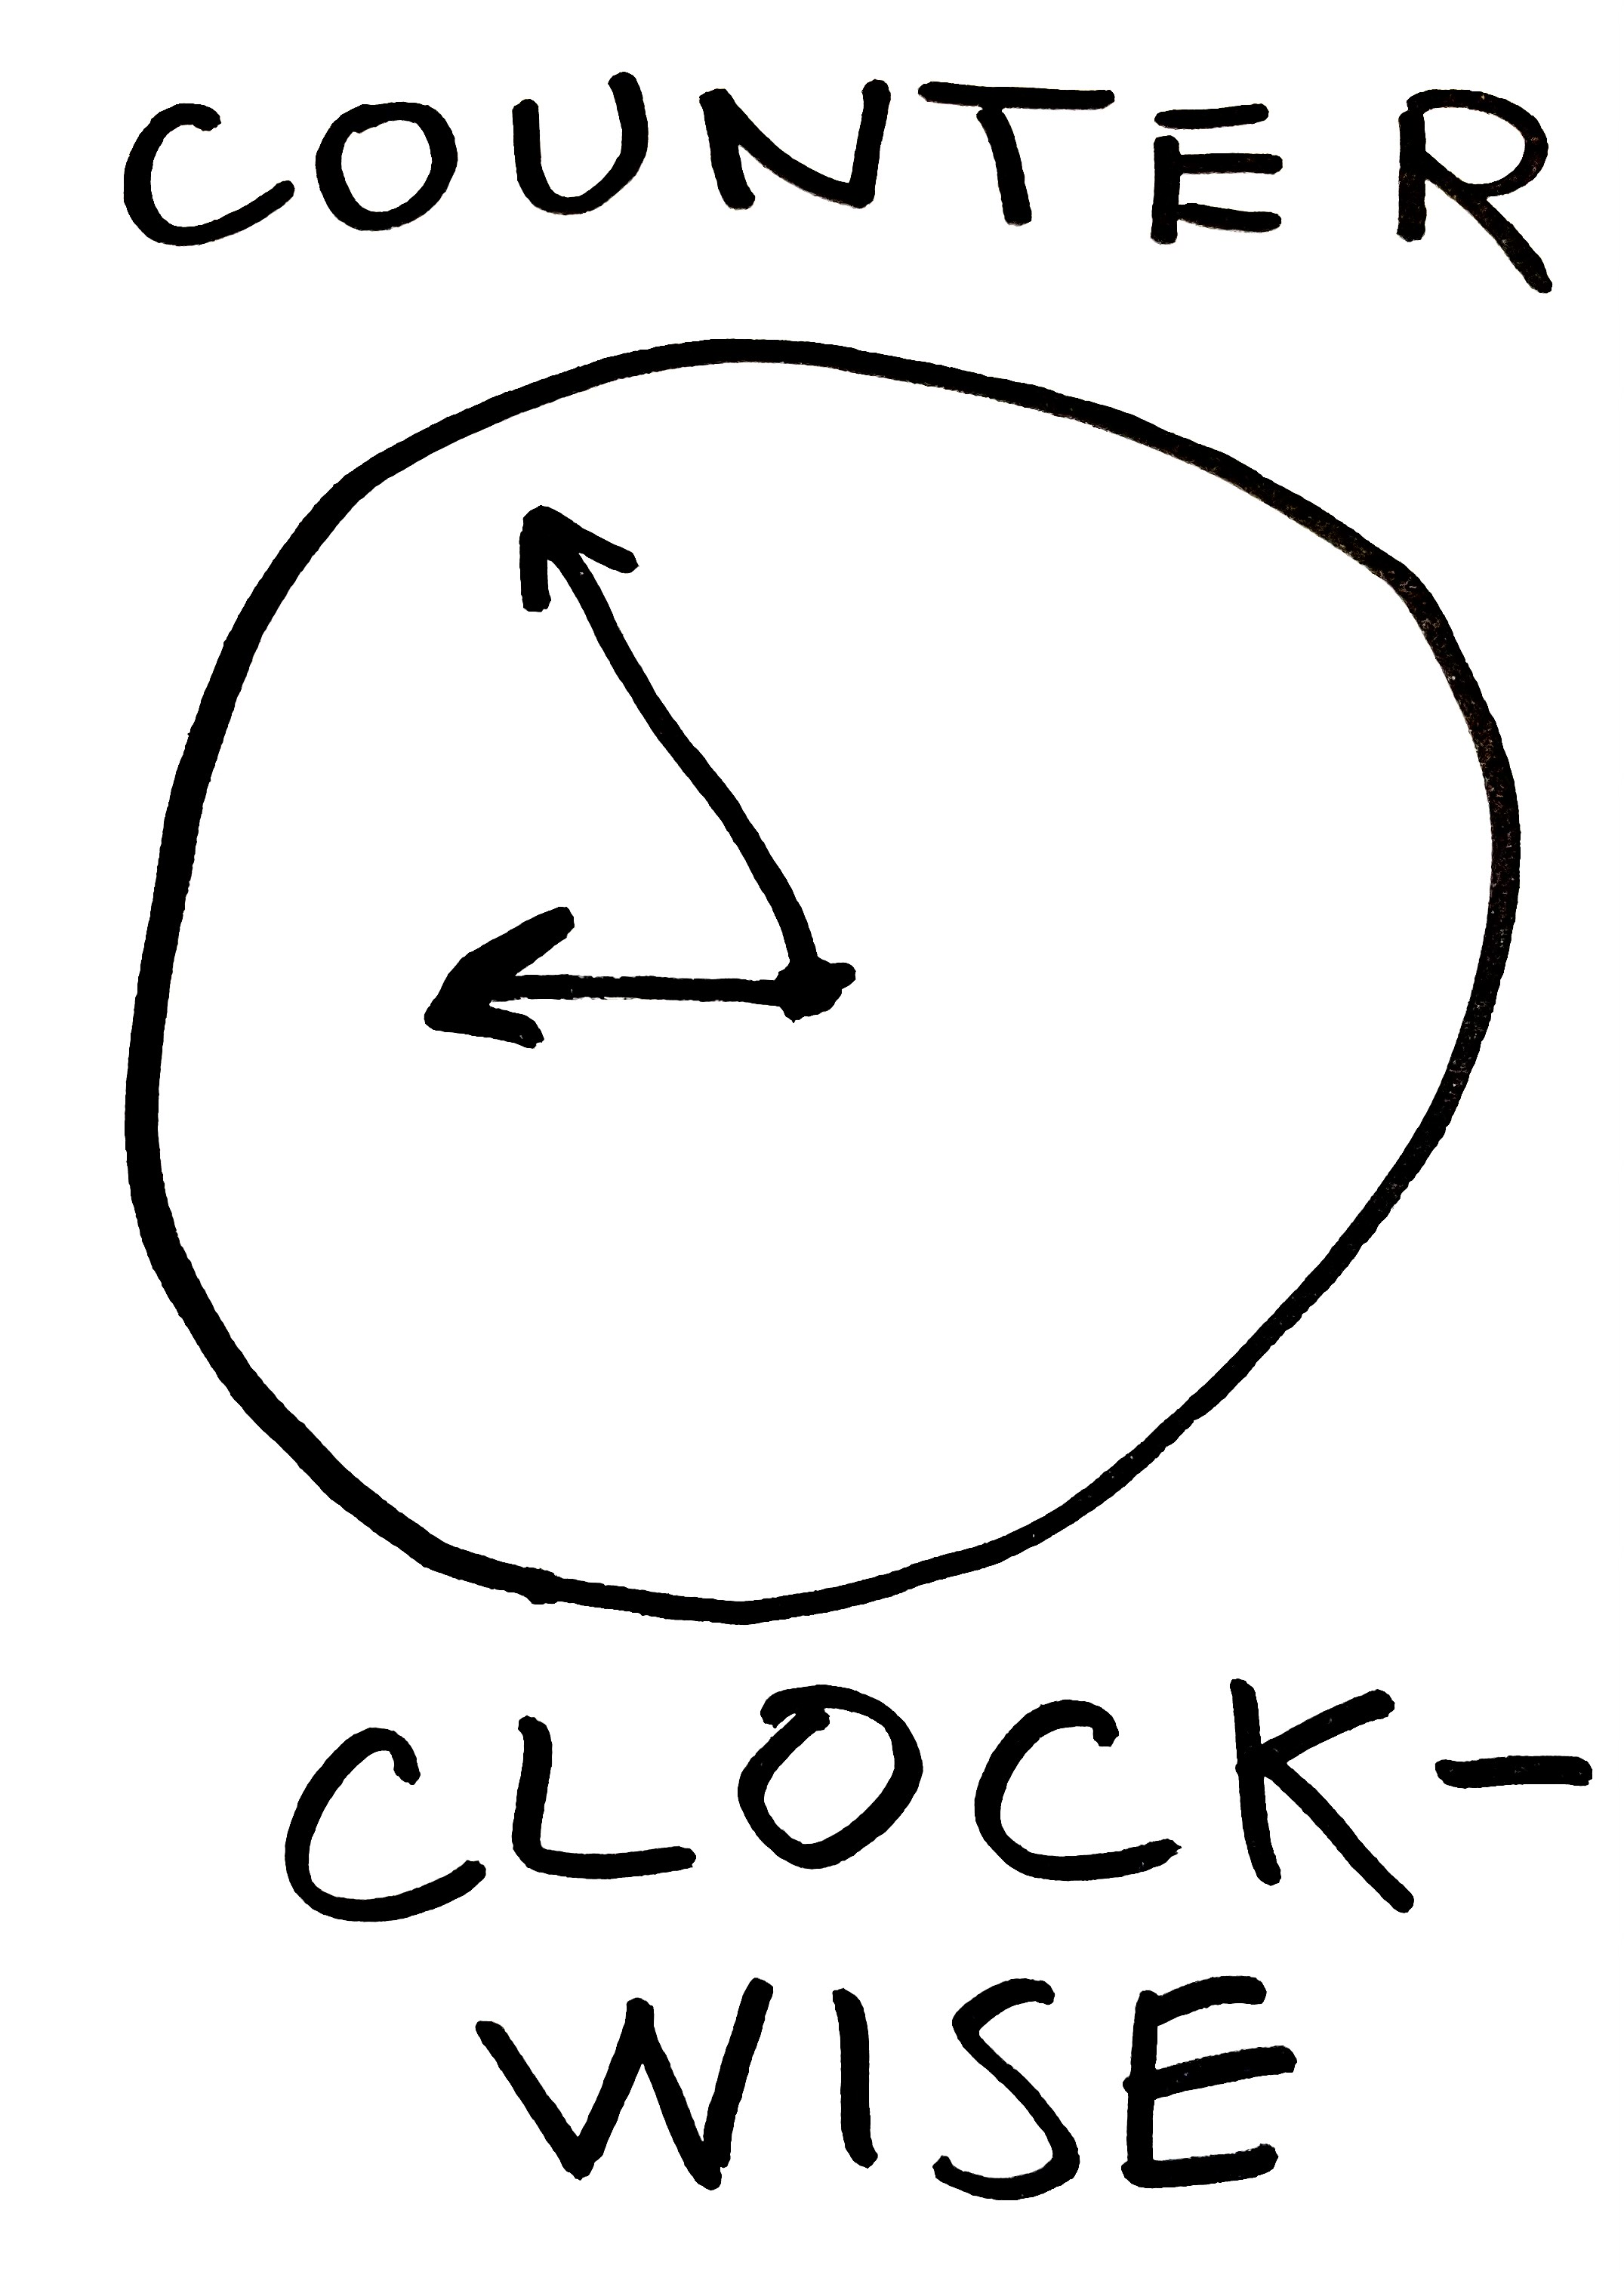 Counter Clock-wise